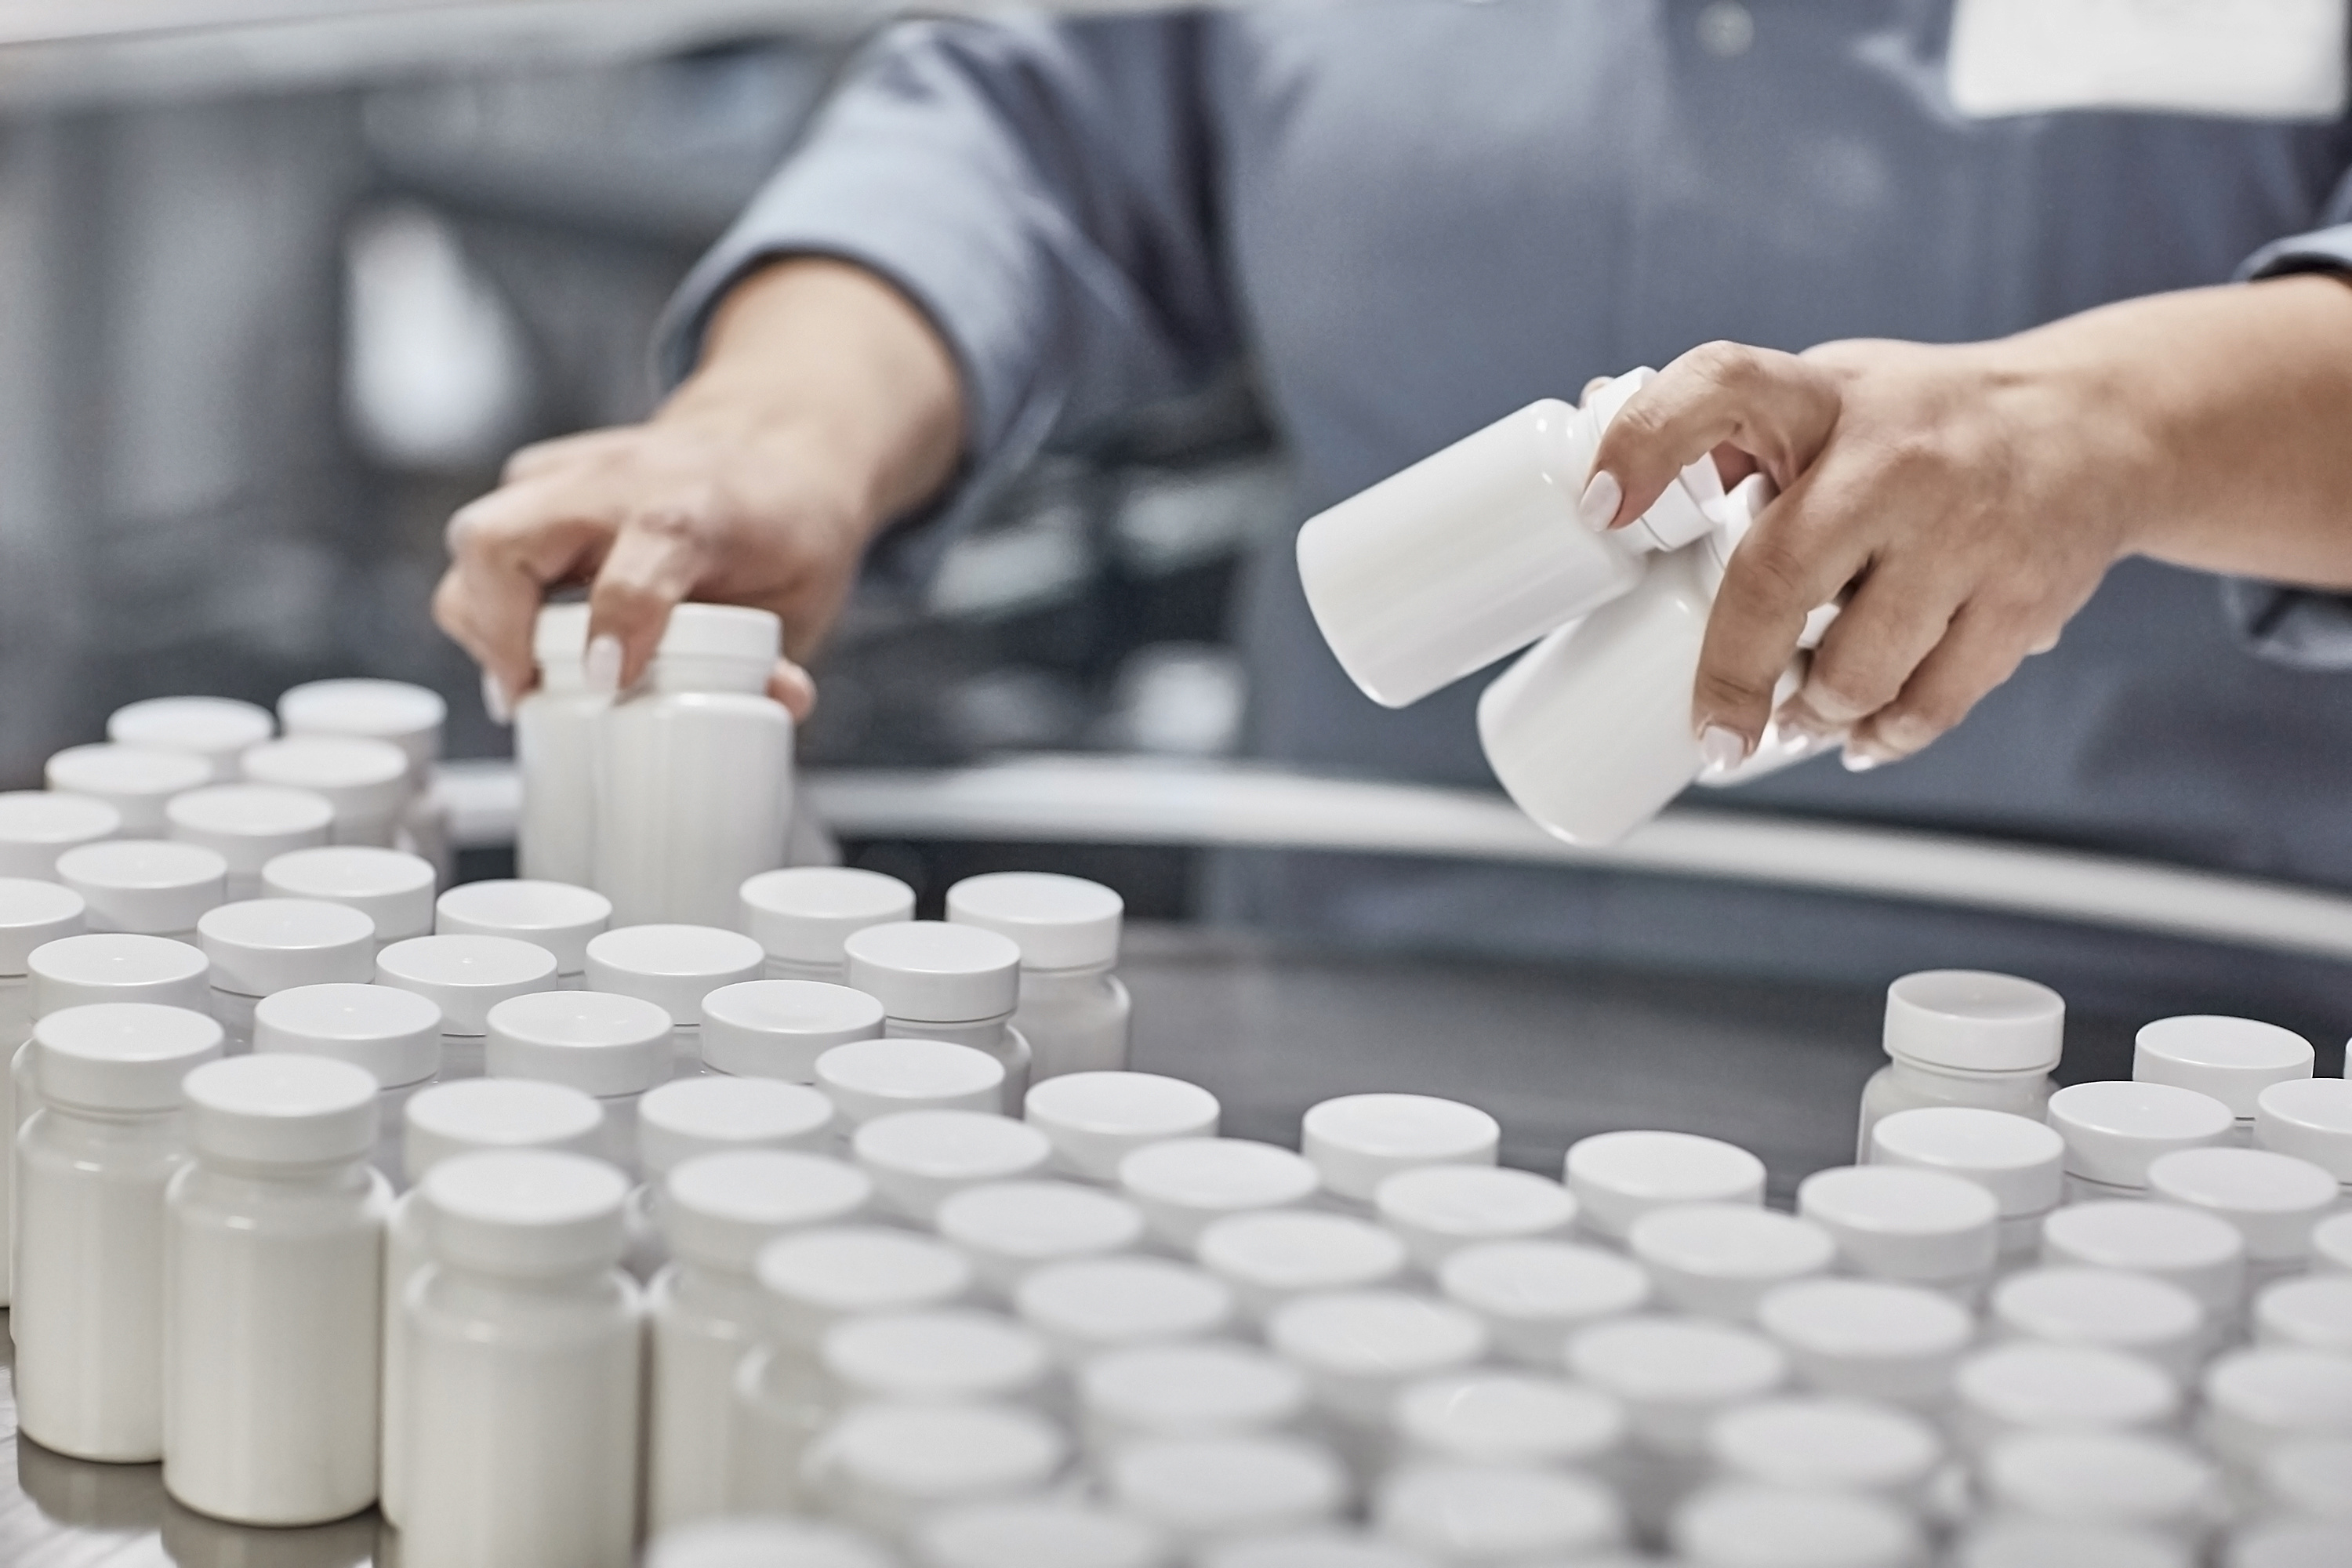 How This Current Pandemic Changed Product Packaging Testing For Pharmaceutical Companies